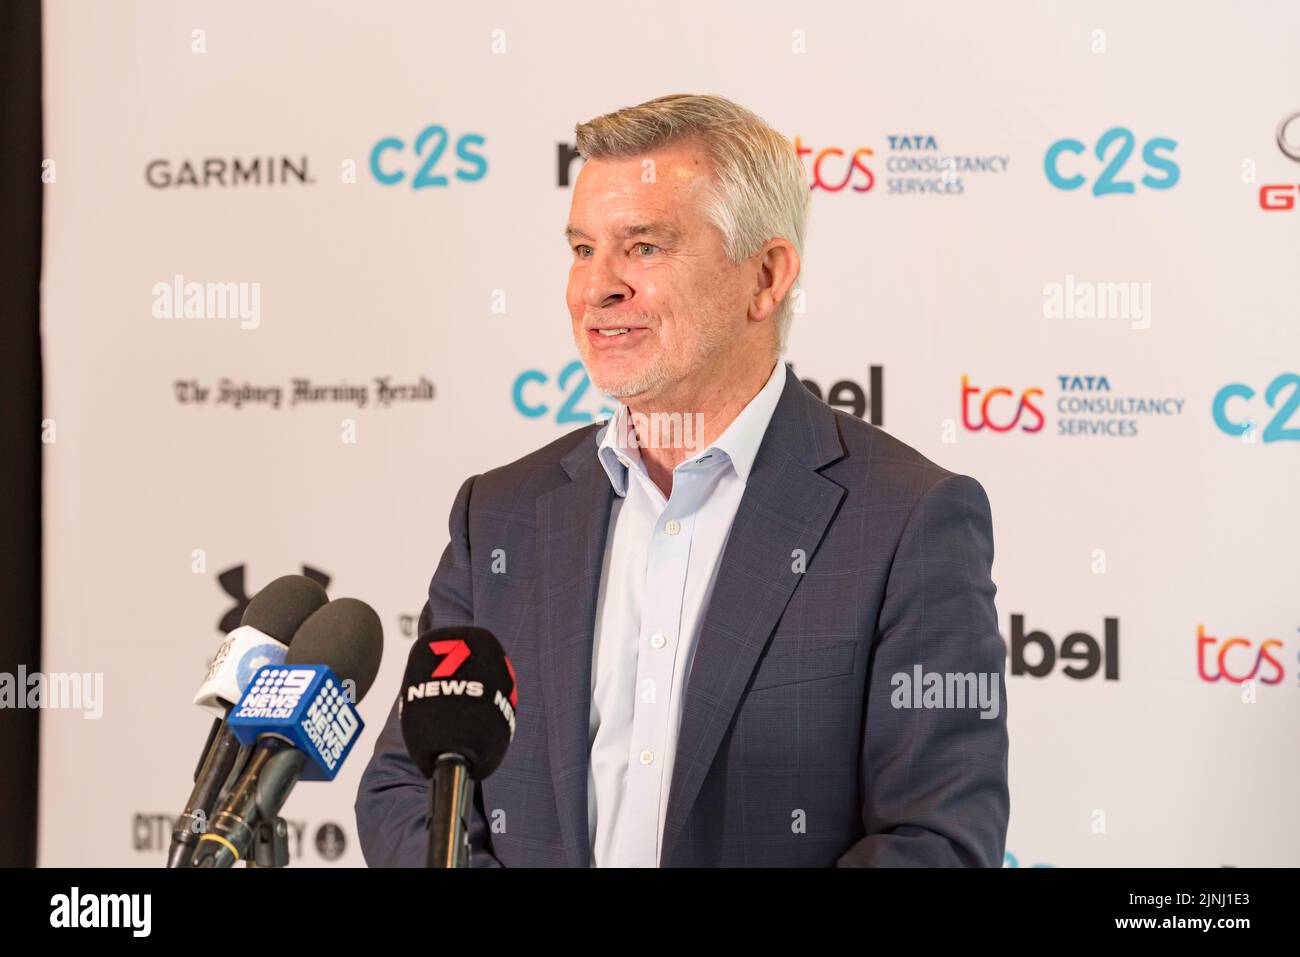 Sydney, Australia.12 August 2022: Transport For NSW Exec. Director, Customer Journey Planning, Craig Moran, at a press conference prior to the 50th City2Surf race in Sydney on Sunday. This will be the first race since 2019 after cancellations in 2020 and 2021 due to Covid-19. 60,000+ people are expected cover the fourteen-kilometre race, the largest of its kind in the world. Mr Moran said that extra public transport services will be provided before and after the event to move people as soon as possible. His advice to participants was to please be patient Credit: Stephen Dwyer / Alamy Live News Stock Photo